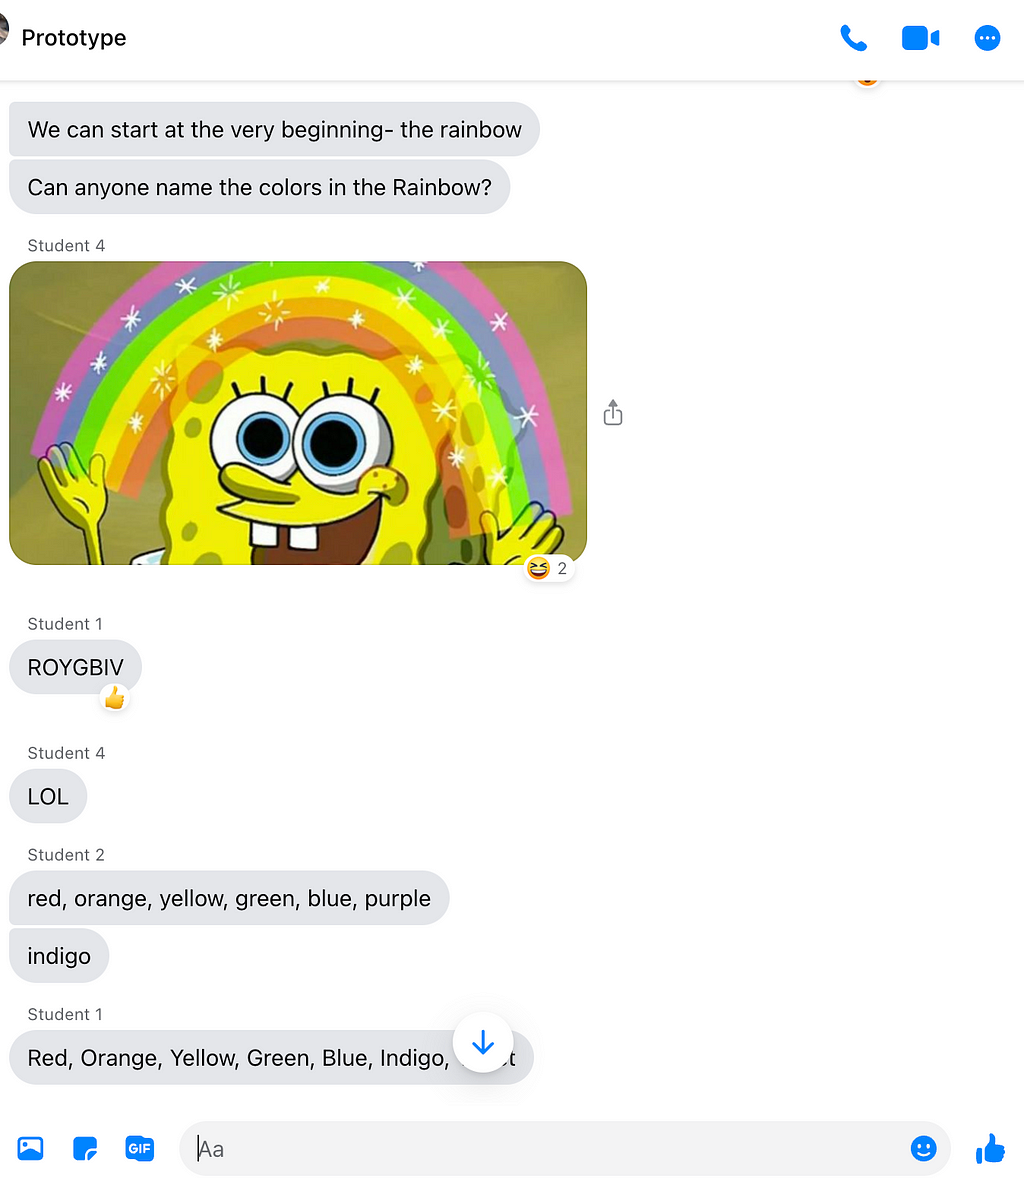 Two screenshots of a group message titled “Prototype” on Facebook messenger. Students 1, 2, and 4 and the Teacher chat about color theory, with Student 4 providing images from popular culture such as Spongebob miming a rainbow and the “Buff Brown” Among Us character.